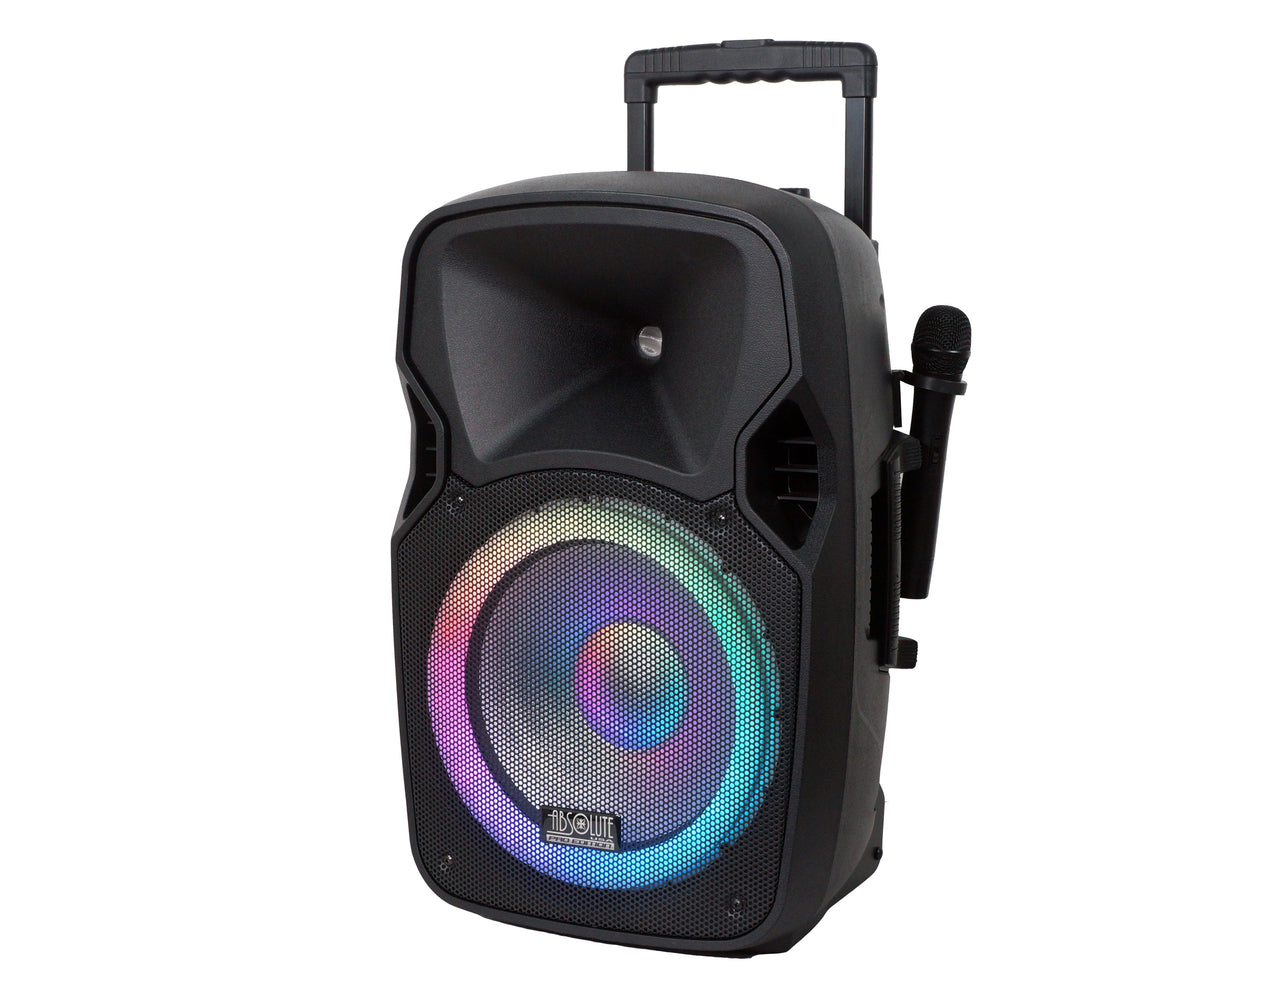 Absolute USA USPROBAT12 Portable Loud Speaker Bluetooth Party 3000W 15 Inch Wireless Microphone